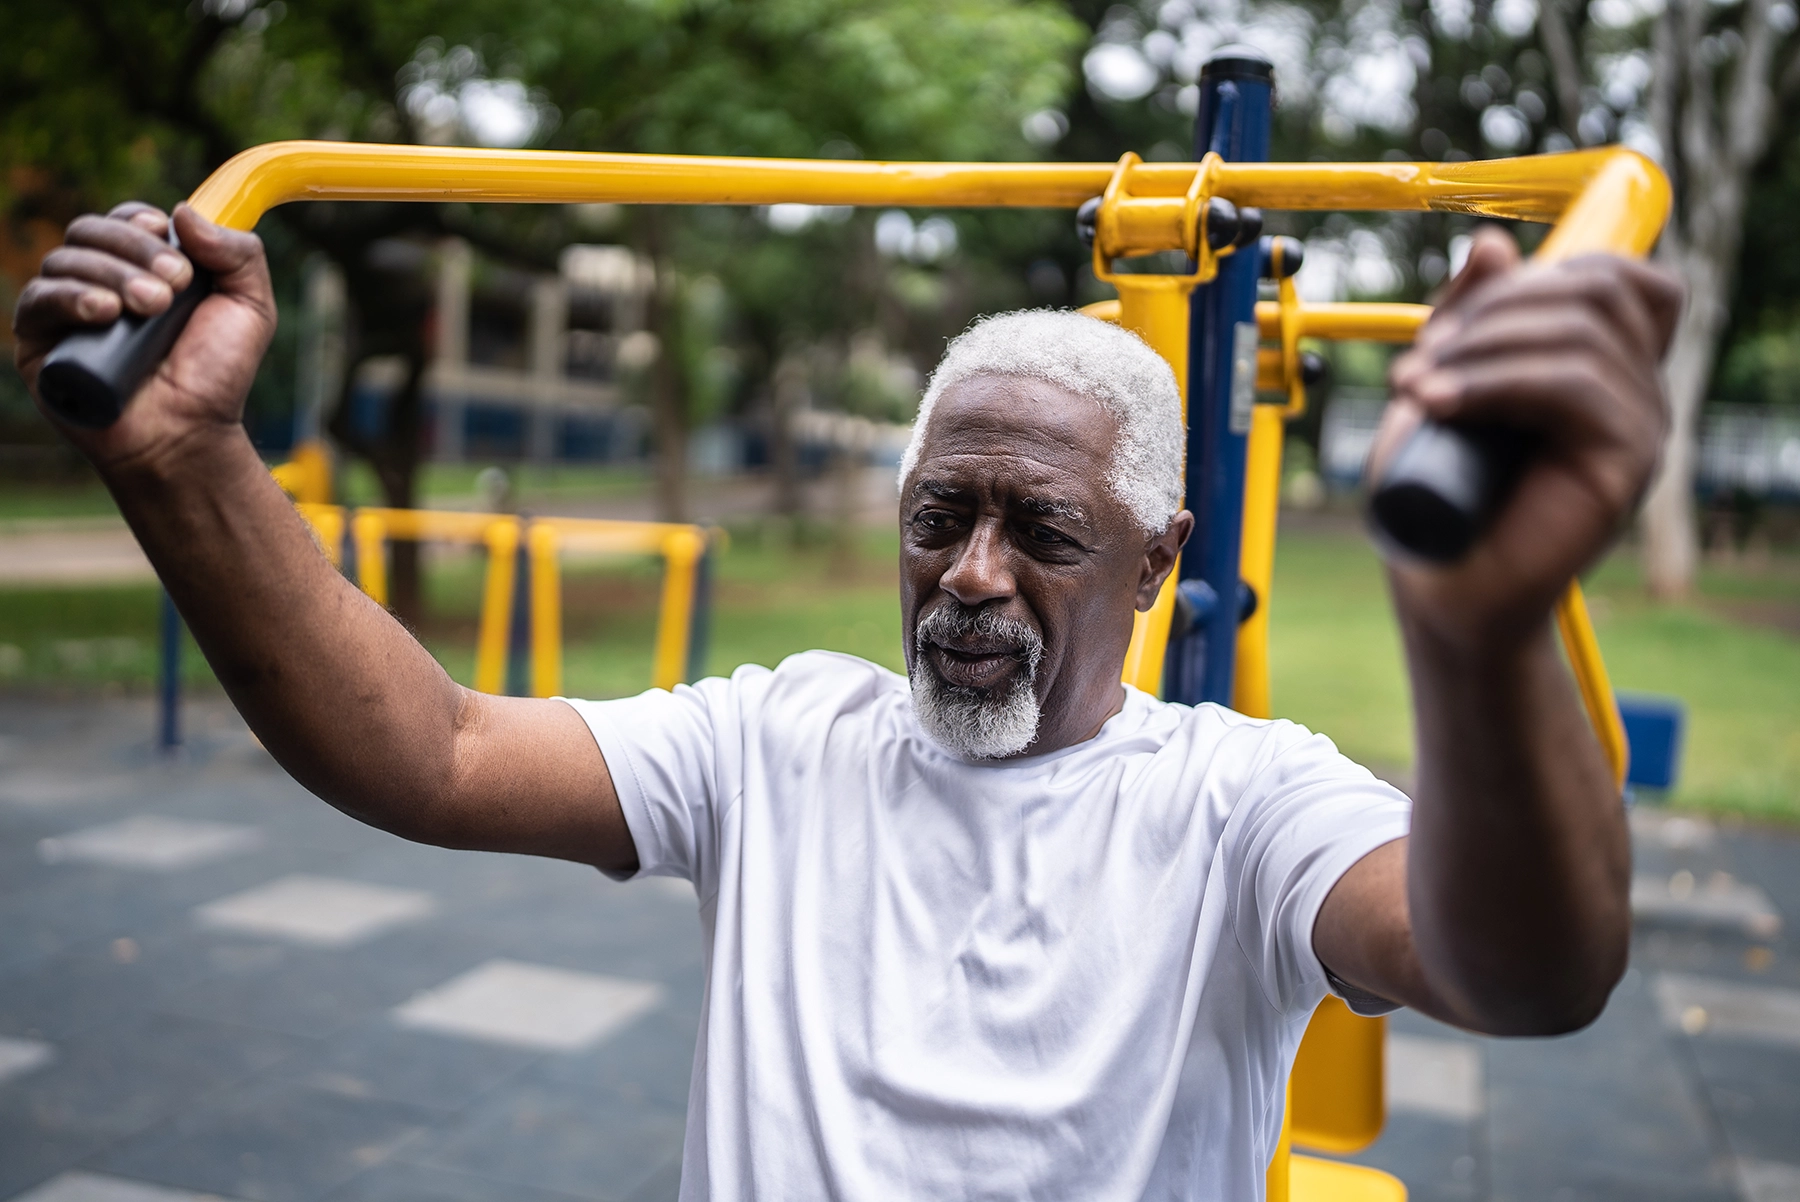 African American man uses strength training equipment in a community park.